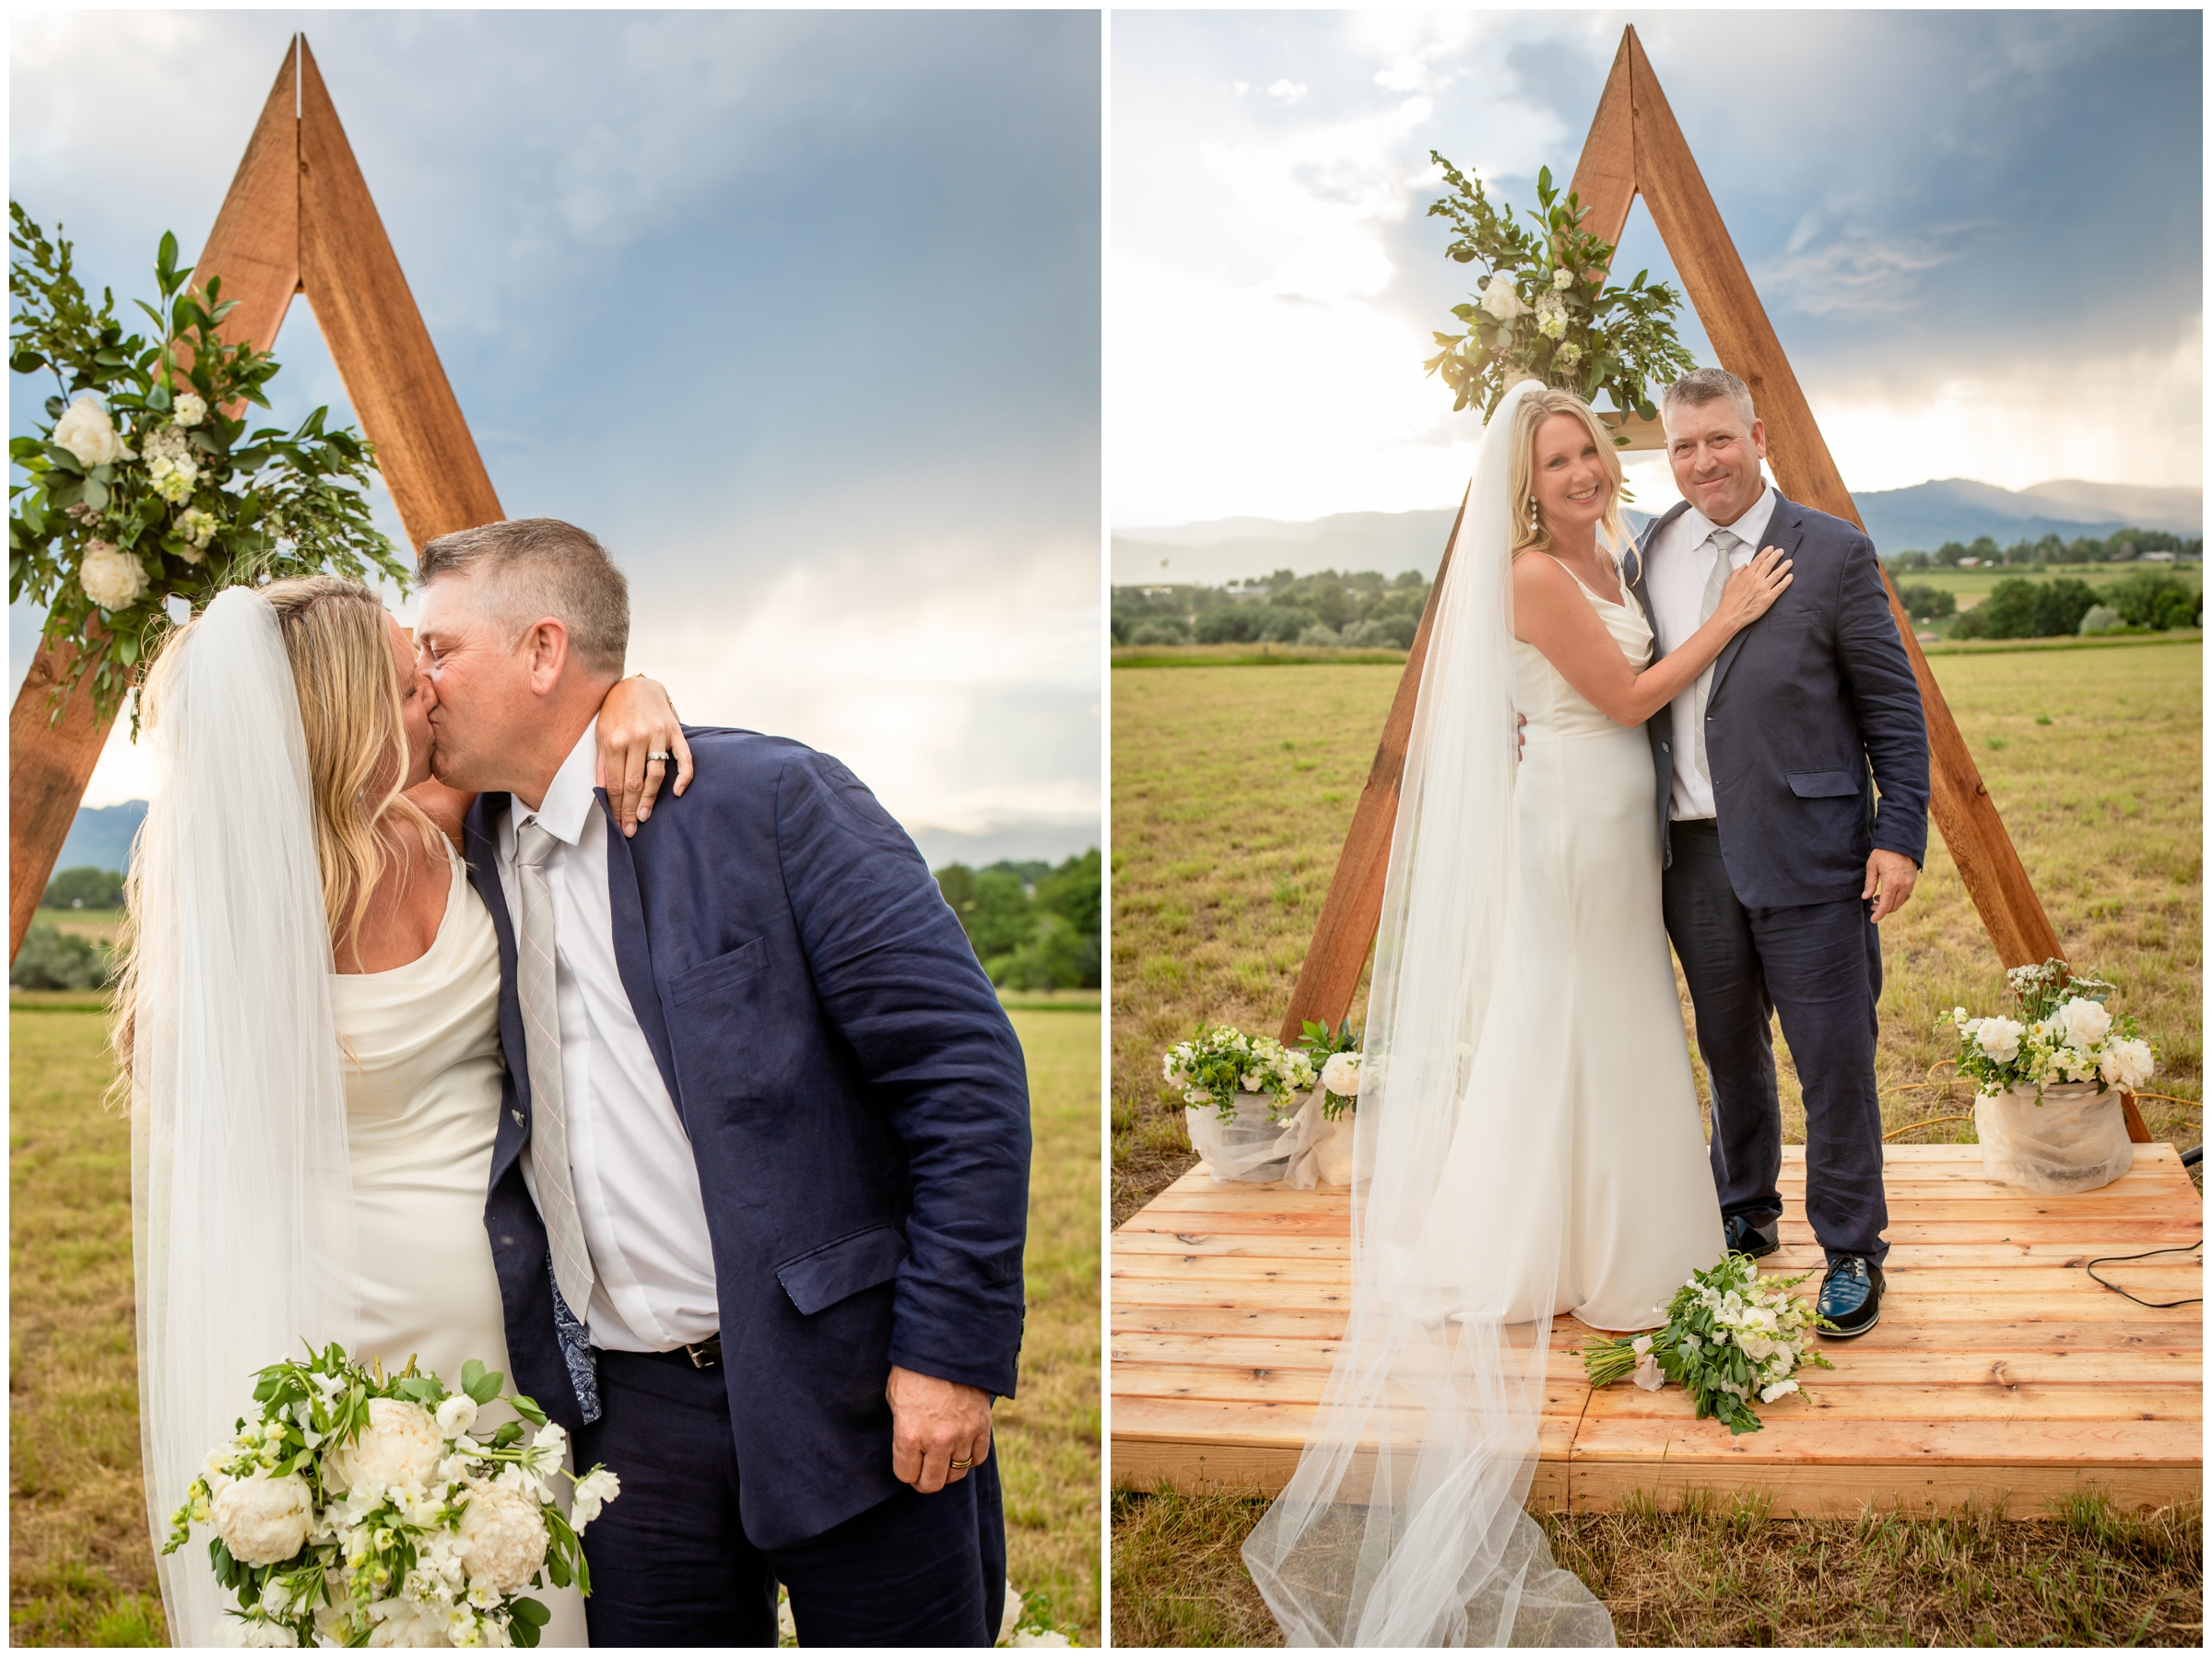 couple kissing in front of ceremony arbor during Boulder Colorado backyard wedding photos during summer